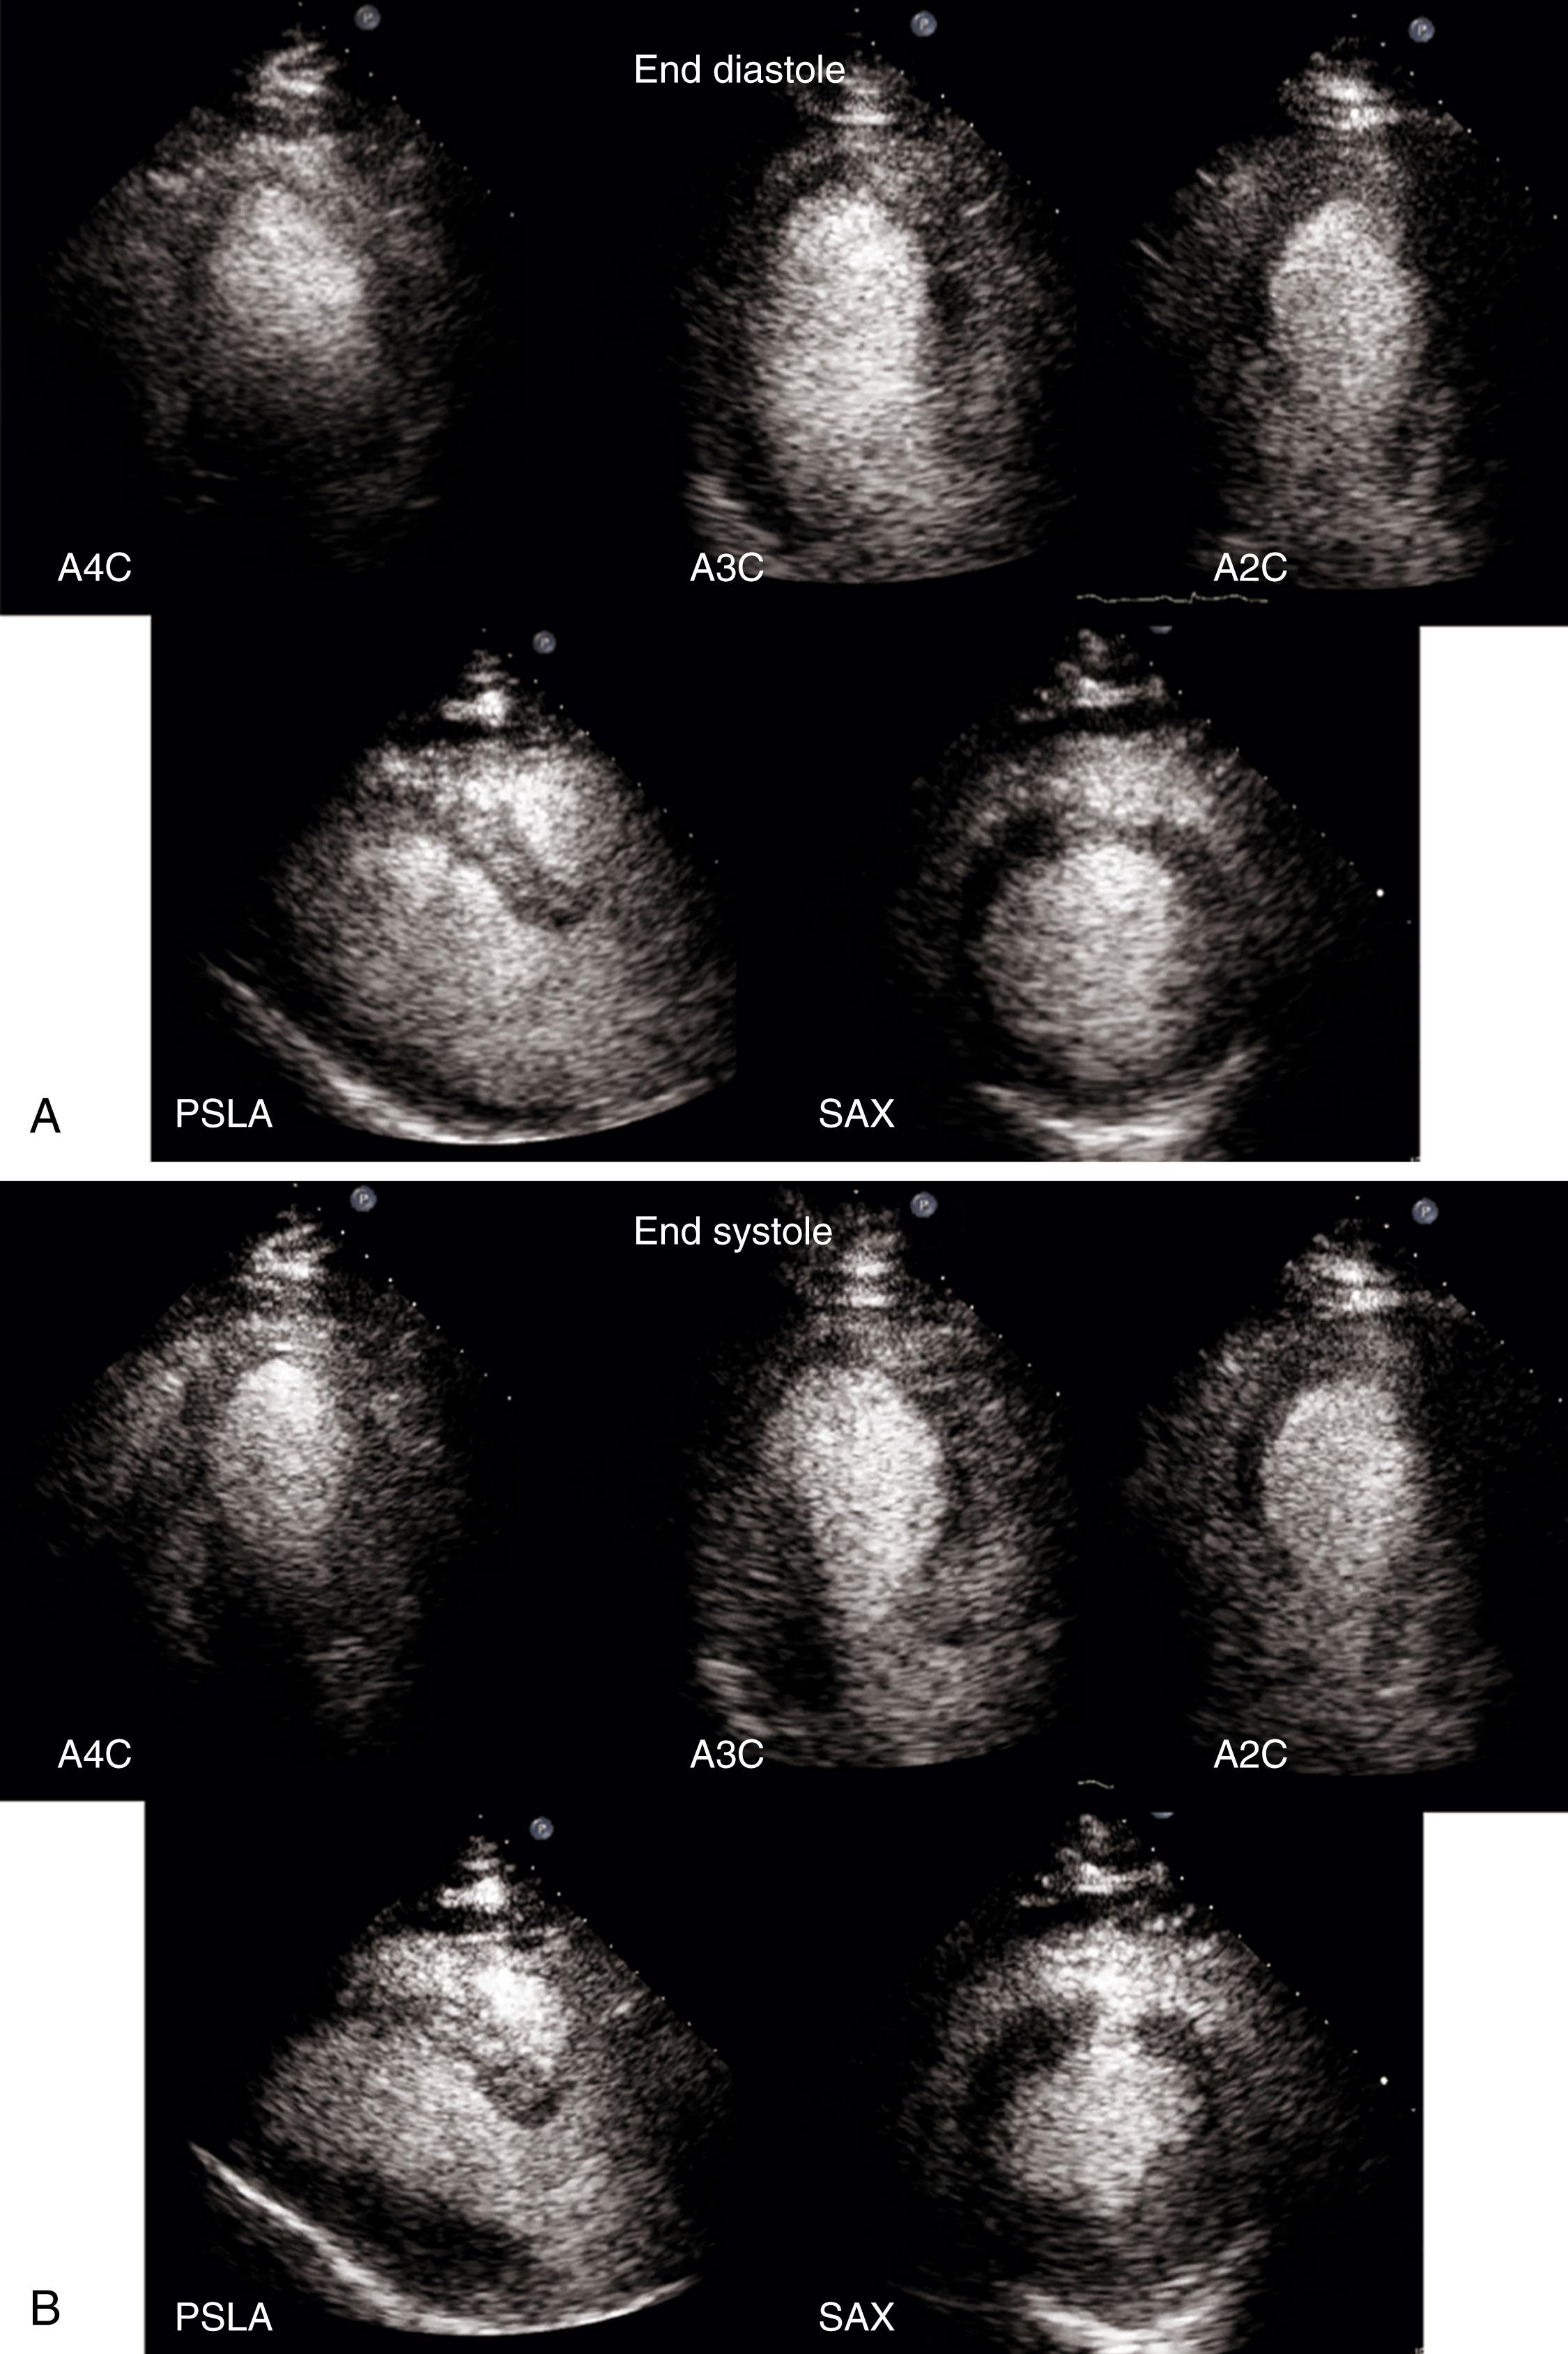 Figure 45.1, Acute left descending coronary (LAD) transmural infarct in a patient who underwent emergent revascularization with no reflow. End-diastolic ( A ) and end-systolic ( B ) transthoracic echocardiography (TTE) images show large area of akinesis in the LAD territory. Accompanying Video 45.1A , Video 45.1B , Video 45.1C , Video 45.1D , Video 45.1E show the apical four-chamber (A4C), apical three-chamber 3C (A3C), apical two-chamber (A2C), parasternal long-axis (PSLA), and parasternal short-axis (SAX) TTE views, respectively. C, Delayed contrast-enhanced cardiac magnetic resonance image shows a transmural LAD infarct ( bright areas) with severe microvascular obstruction (dark endocardial areas) extending throughout the whole thickness of the infarct (arrows).